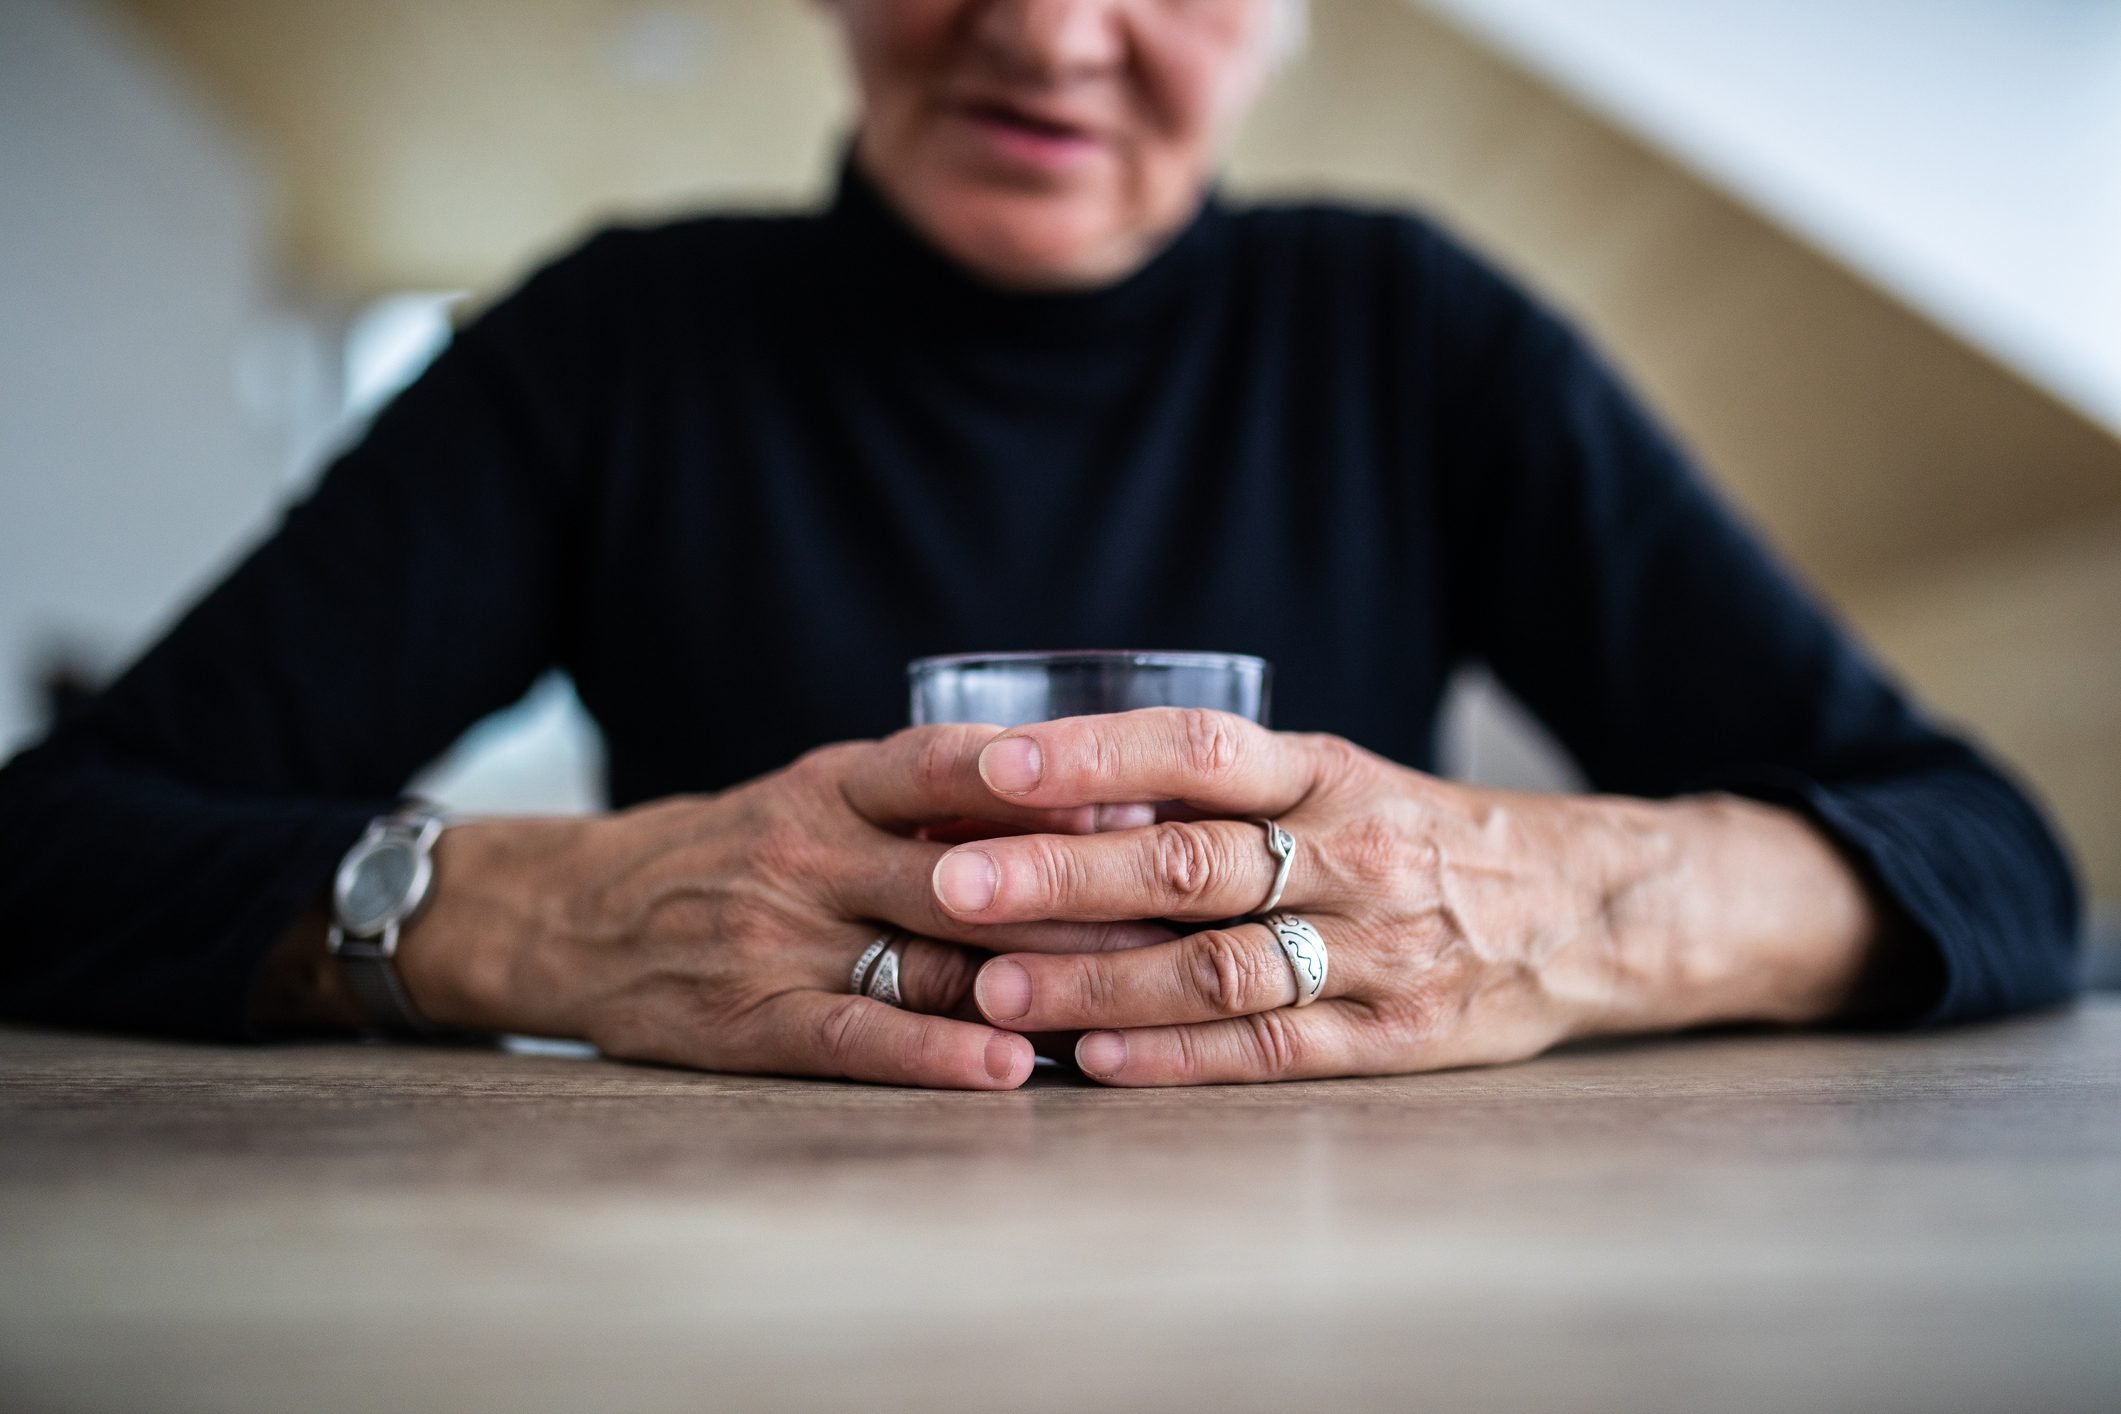 older woman struggling with alcohol addiction